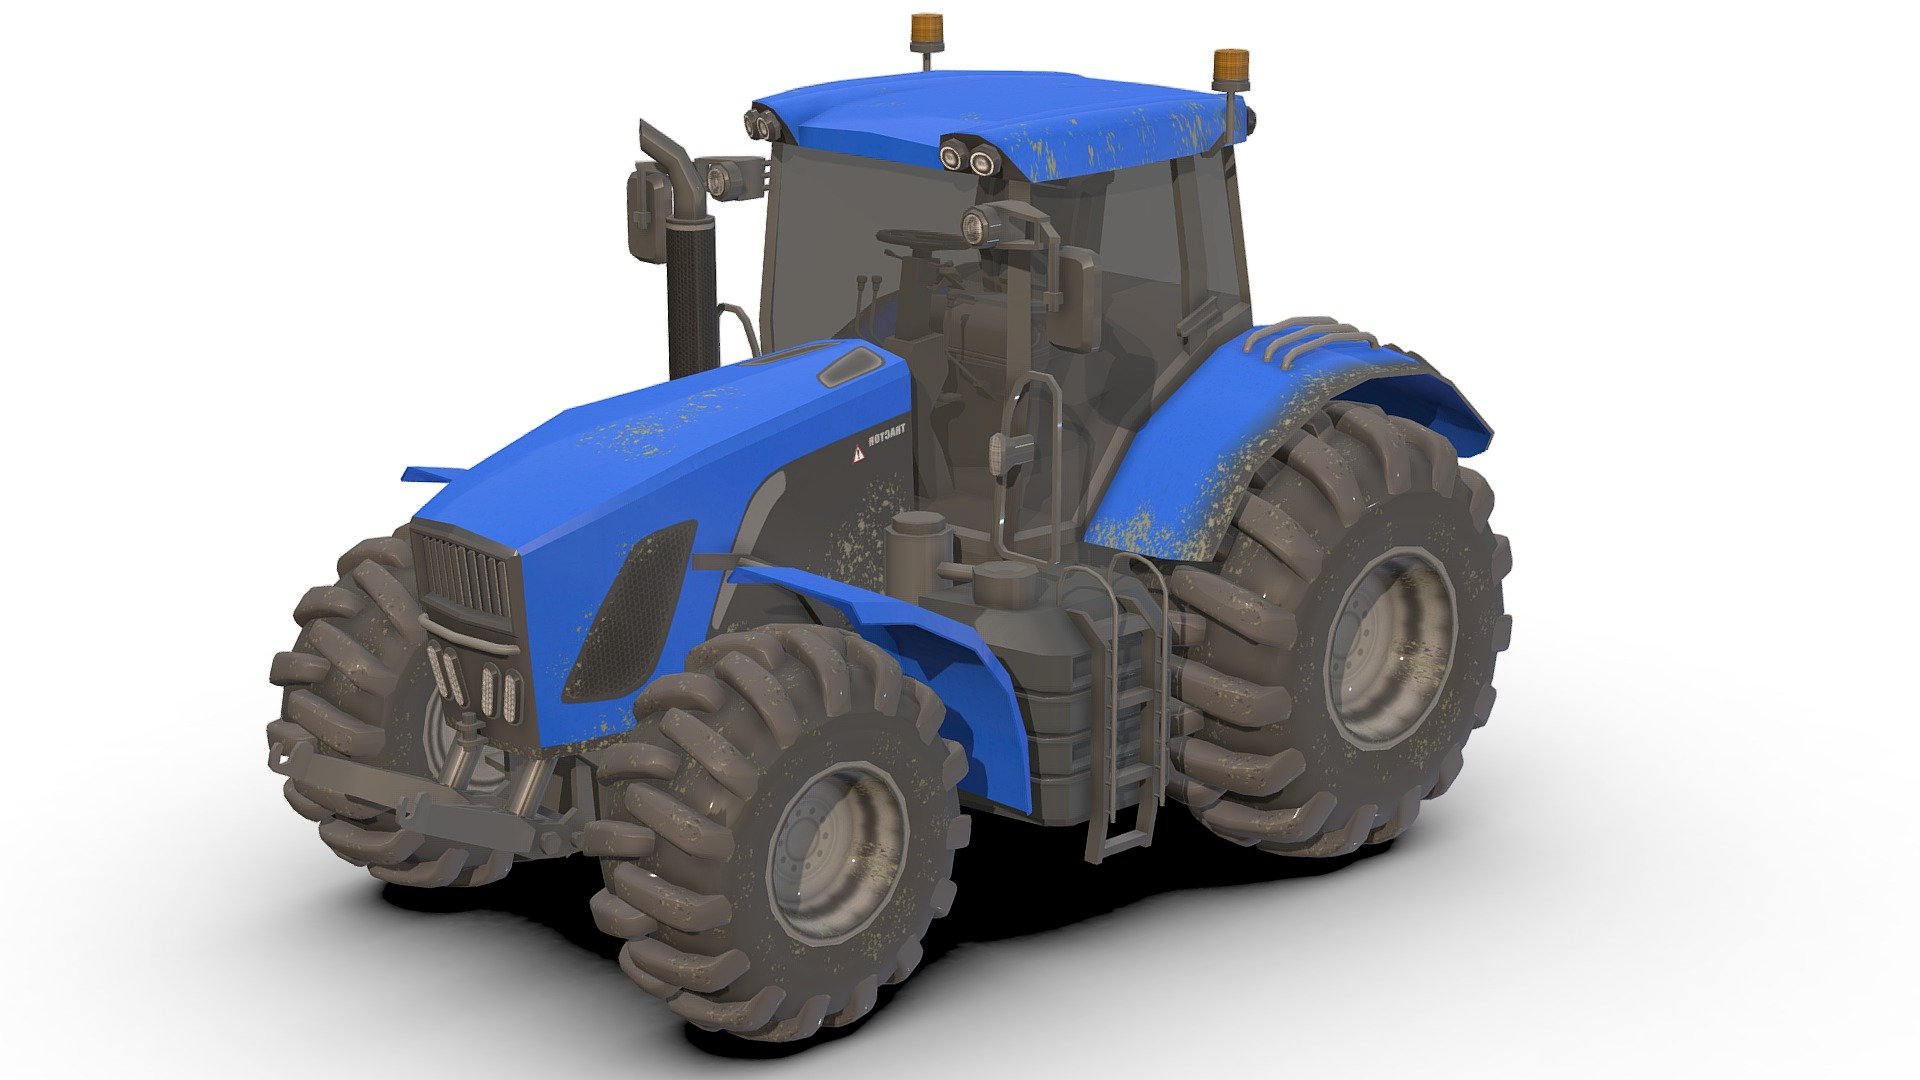 Tractor Model .

You can use these models in any game and project.

This model is made with order and precision.

Separated parts (bodys. wheels.Steer).

Very Low- Poly.

Truck have separate parts.

Average poly count: 23,000 tris.

Texture size: 2048 / 1024 (PNG).

Number of textures: 2.

Number of materials: 2.

Format: Fbx / Obj / 3DMax .

Wait for my new models.. Your friend (Sidra) 3d model